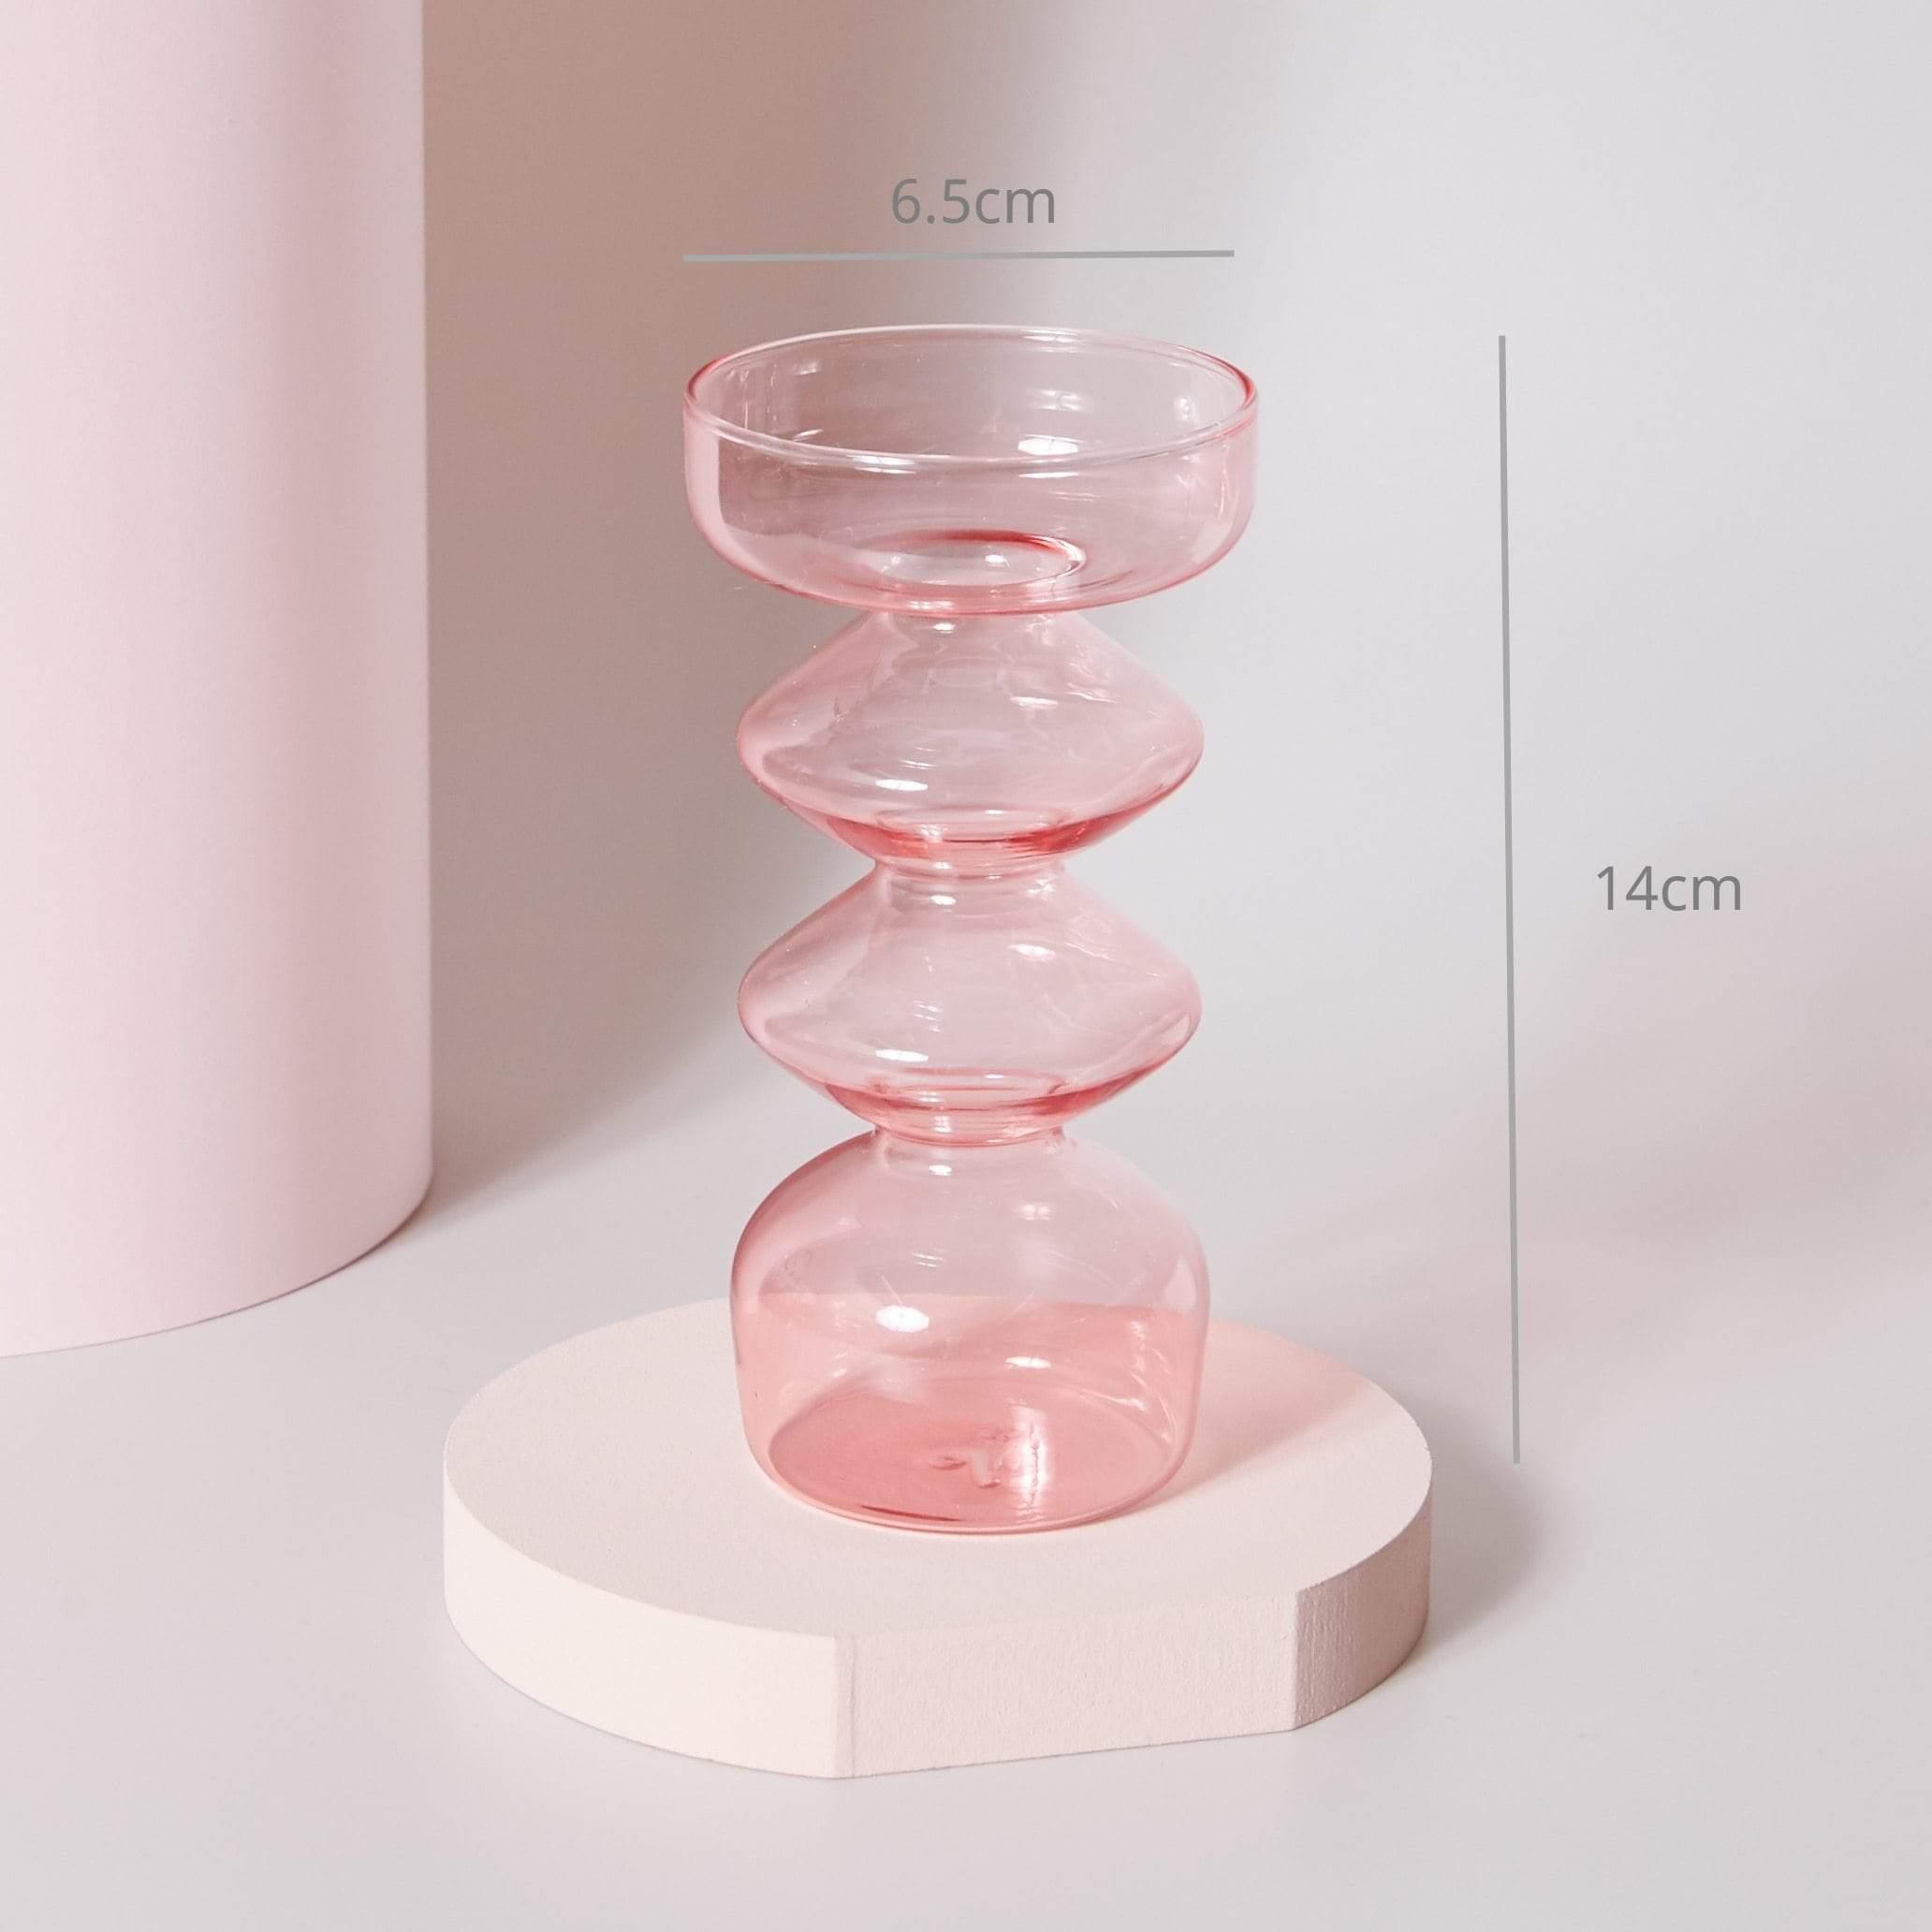 Shop 0 Pink diamond Pink Glass Candle Holder Taper Candlesticks Holder Wedding Table Centerpieces Nordic Home Decoration Mademoiselle Home Decor